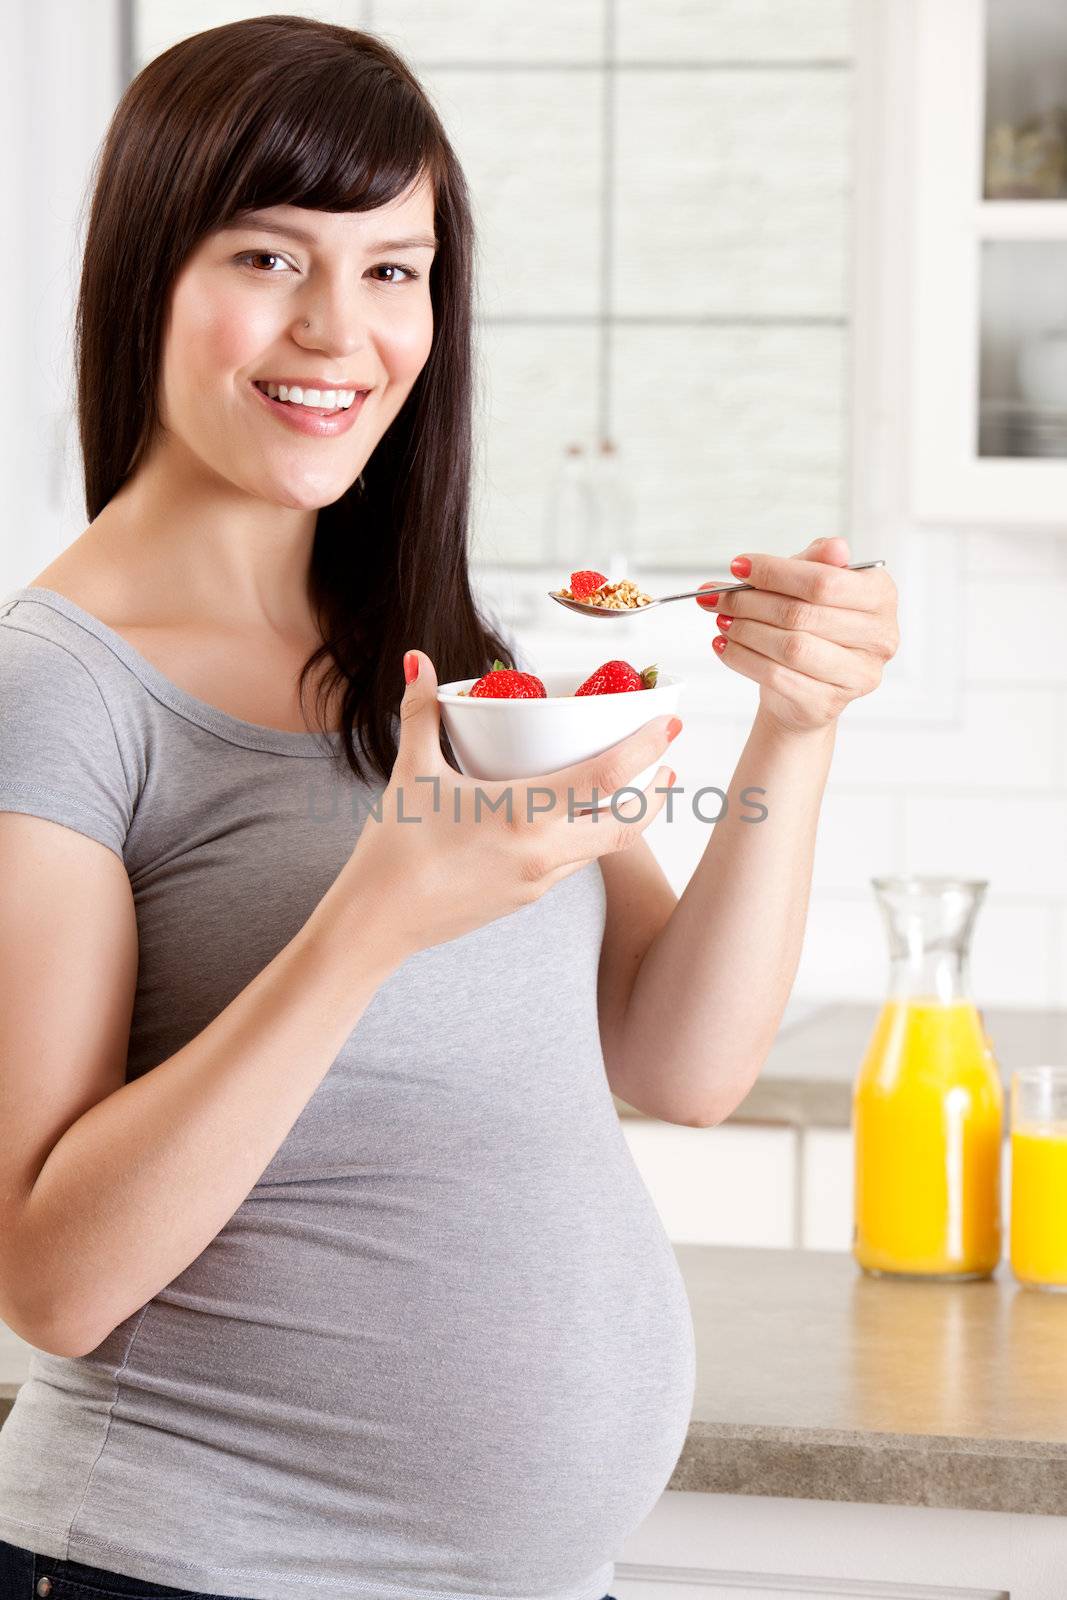 Pregnant woman eating healthy breakfast of granola and strawberries